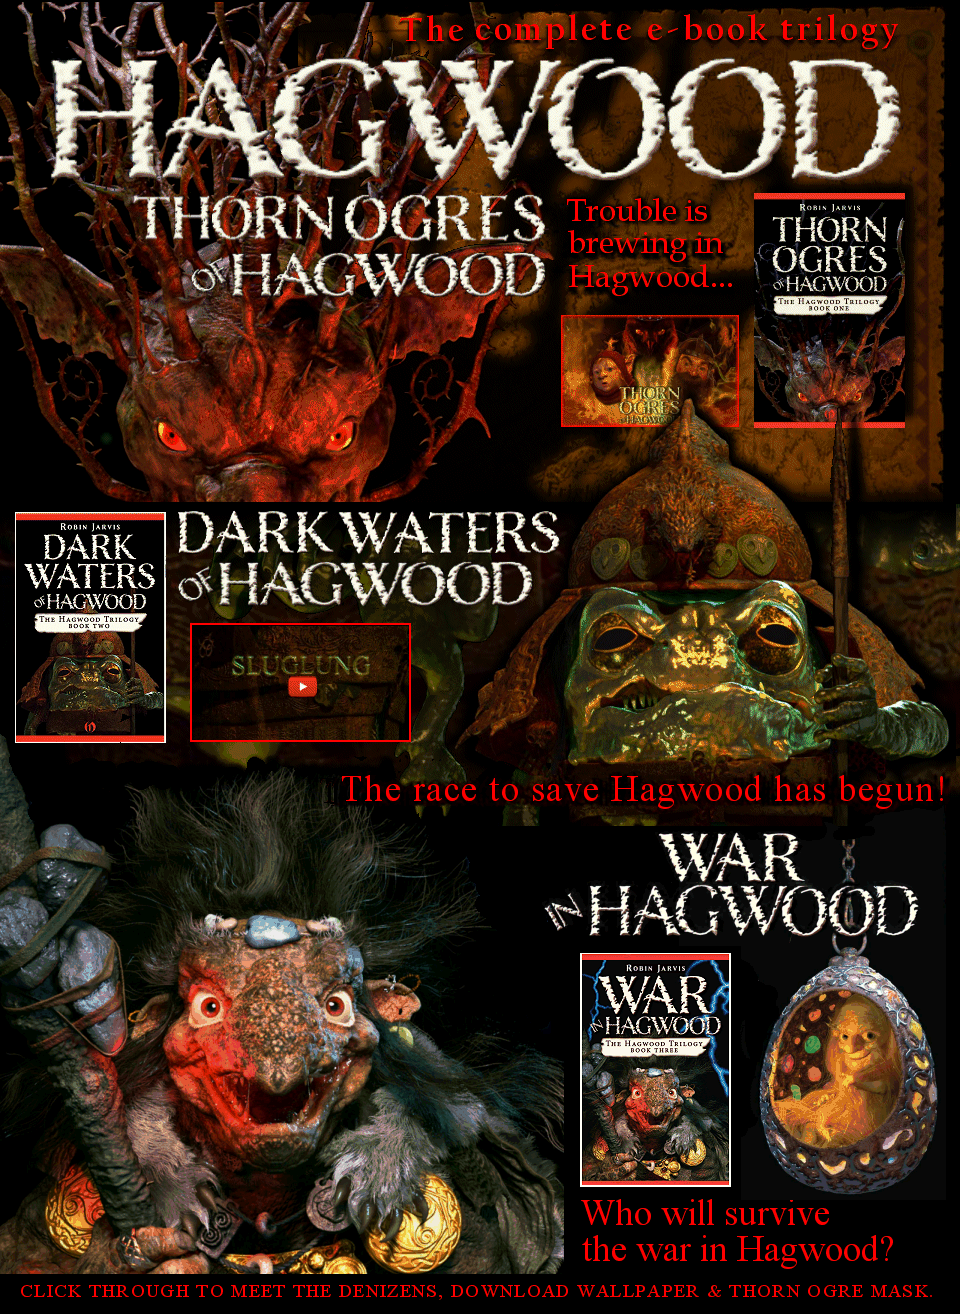 Link to the Hagwood Trilogy homepage